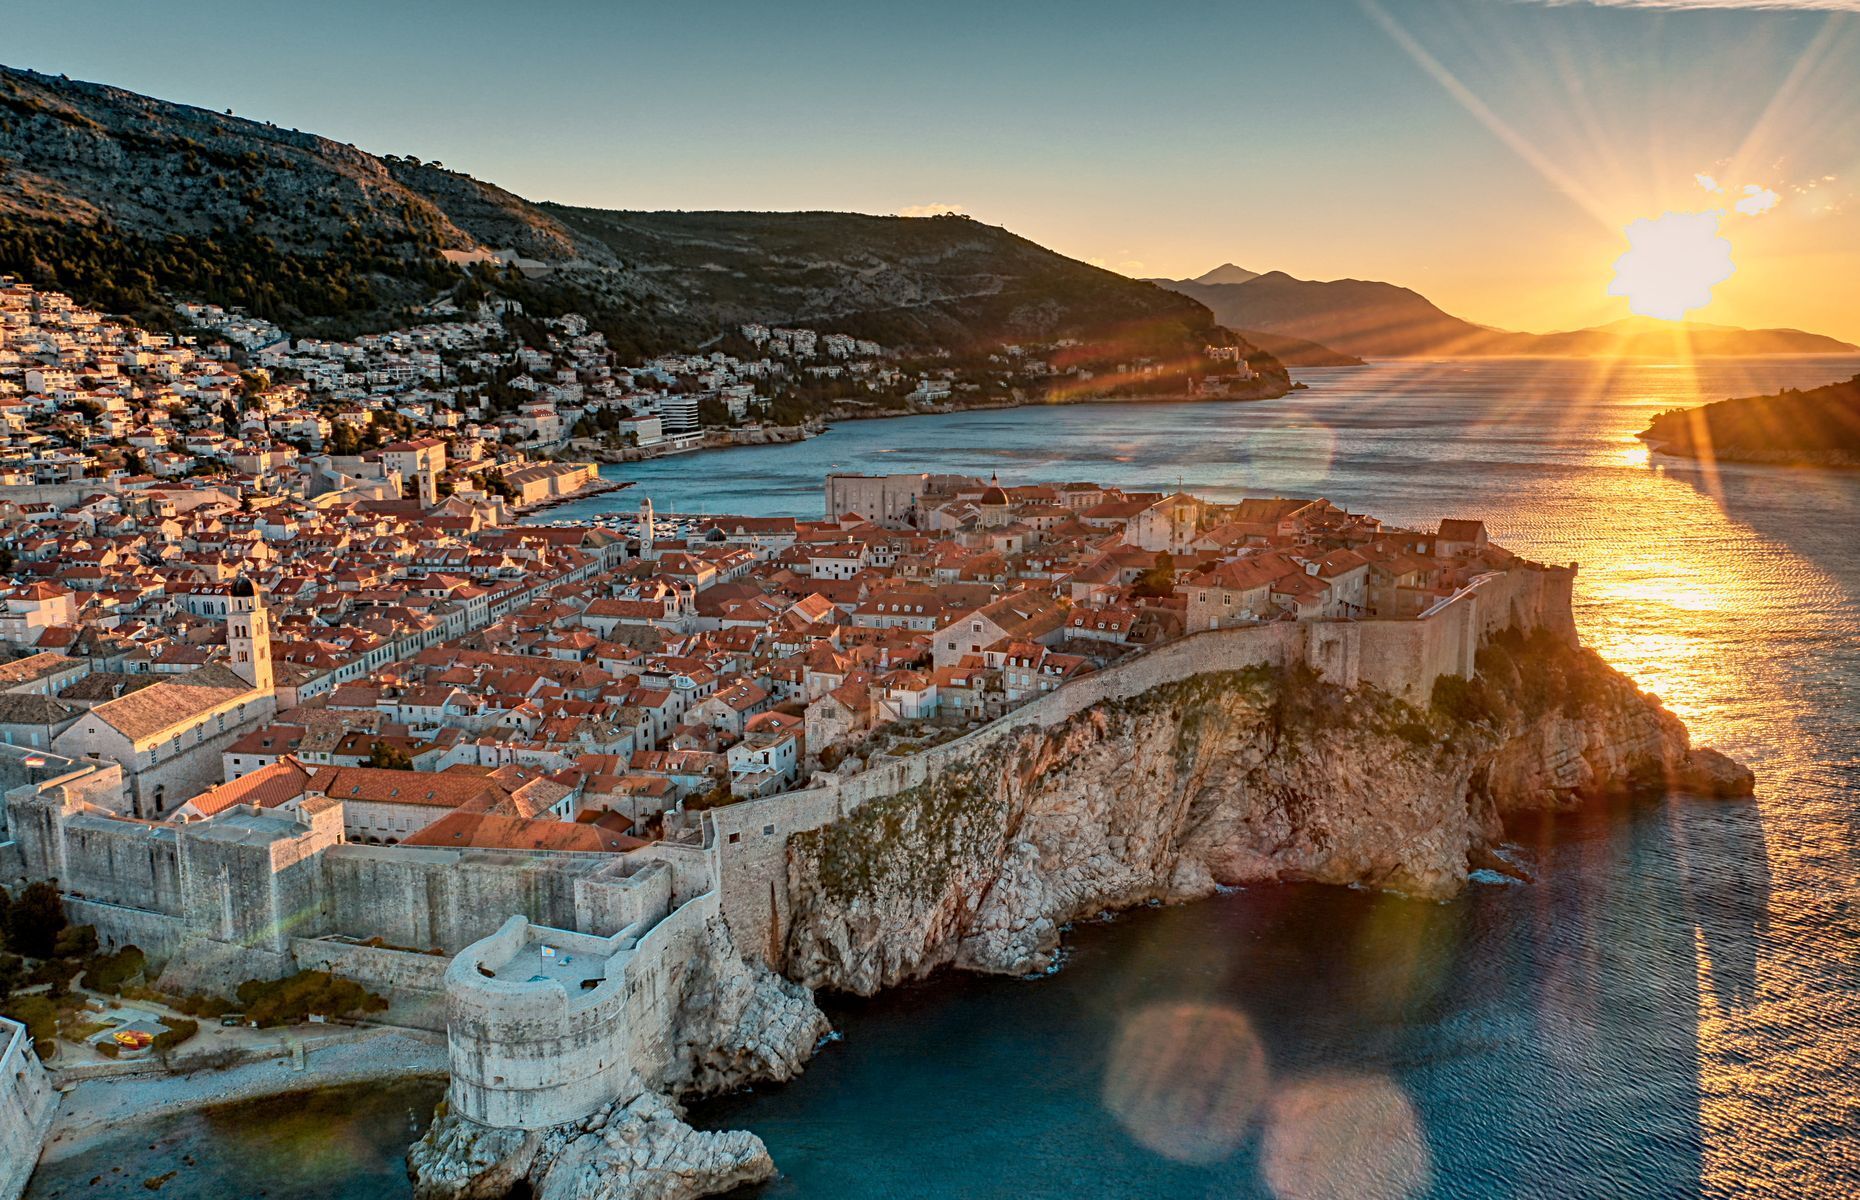 20 magical places to visit in Croatia